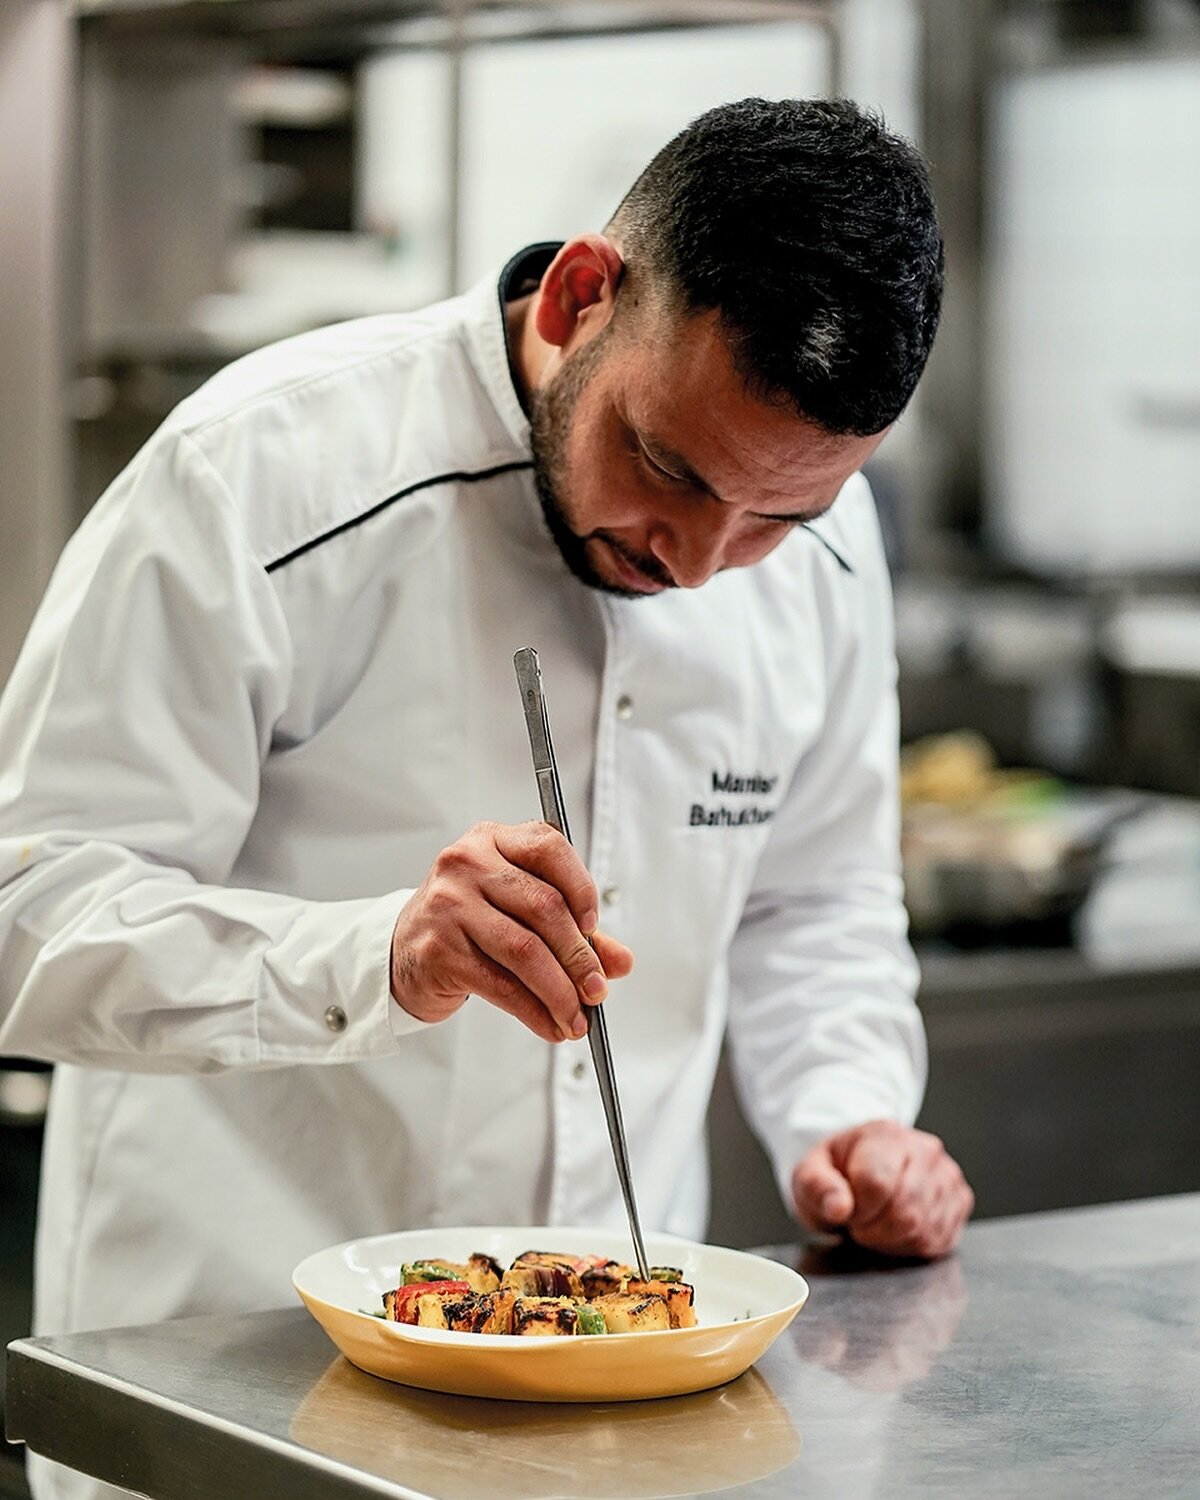 Deep in focus, precision in every move. Executive chef Manish making sure every element of your dish is perfection in flavour and presentation. 
#indiaclubberlin